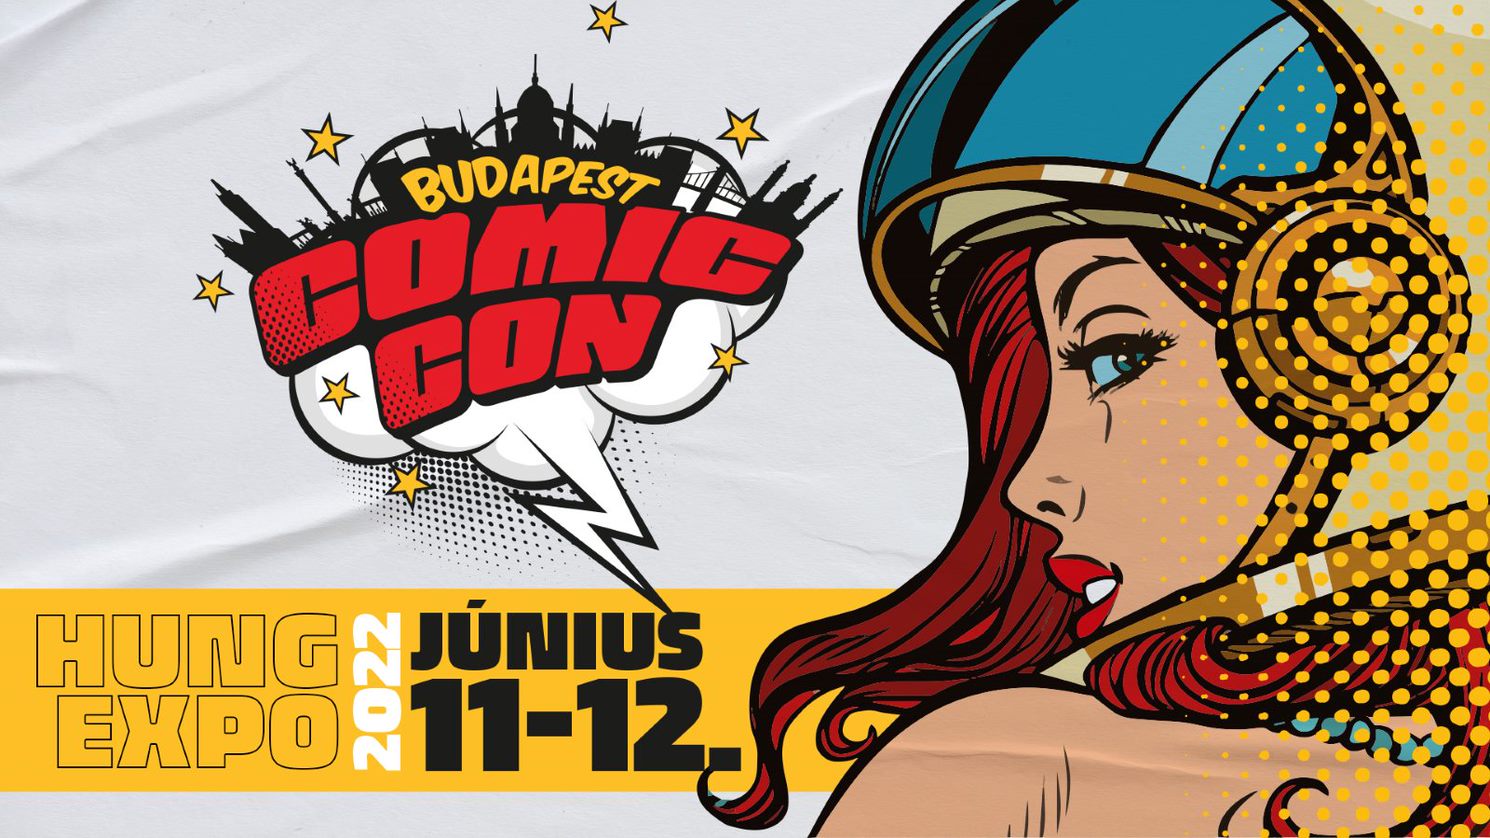 Wham! Blam! Pow! 1st Budapest Comic Con off the Drawing Boar...